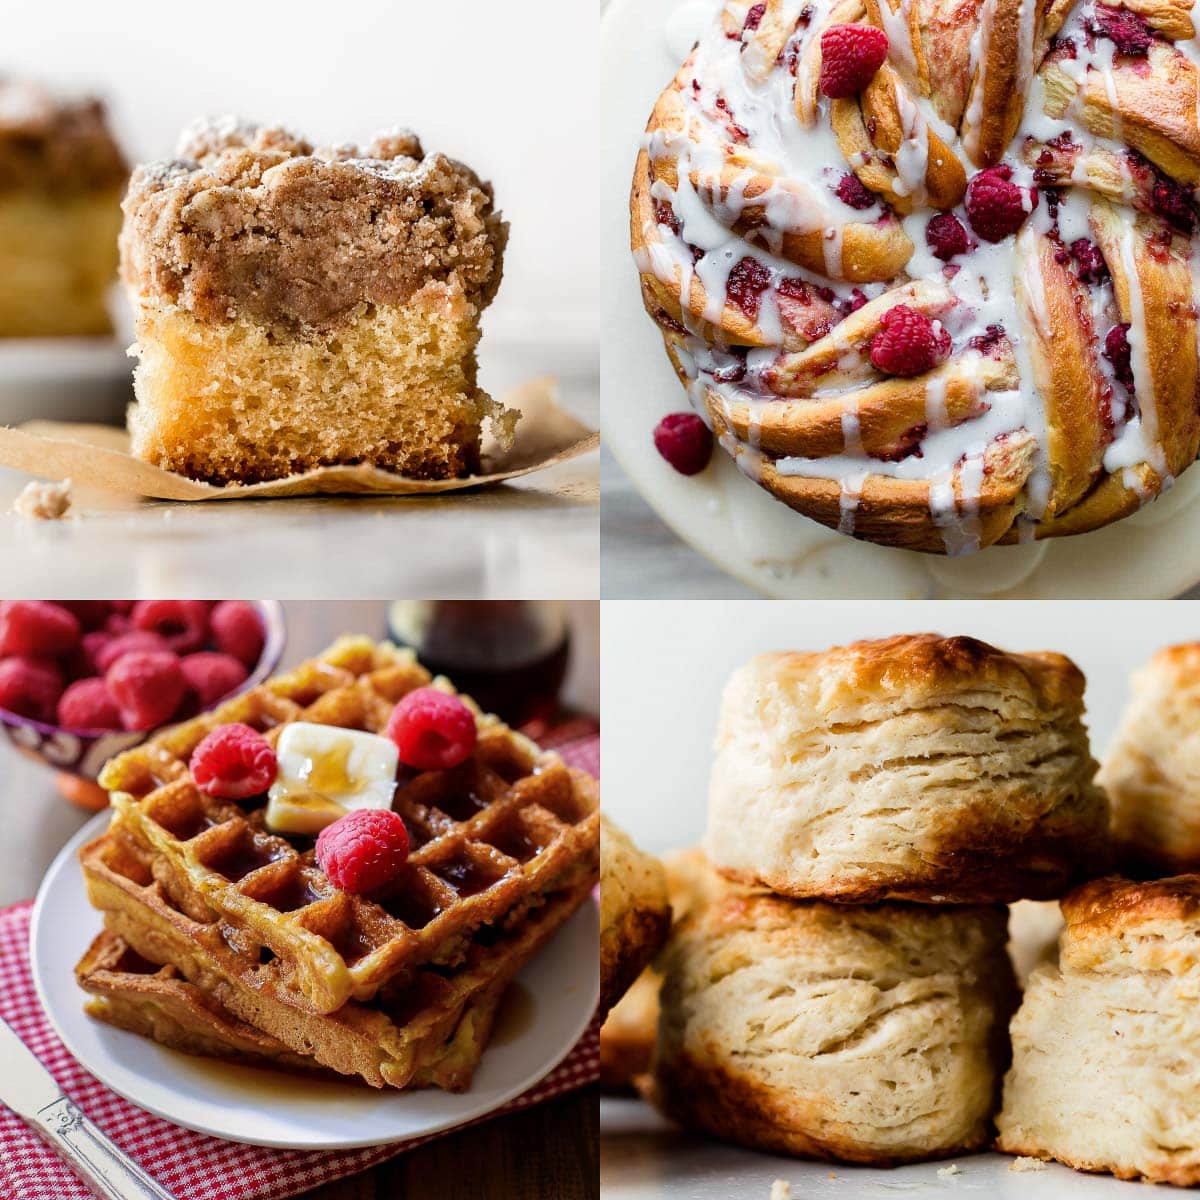 collage of food photos including crumb cake, raspberry twisted bread, waffles, and biscuits